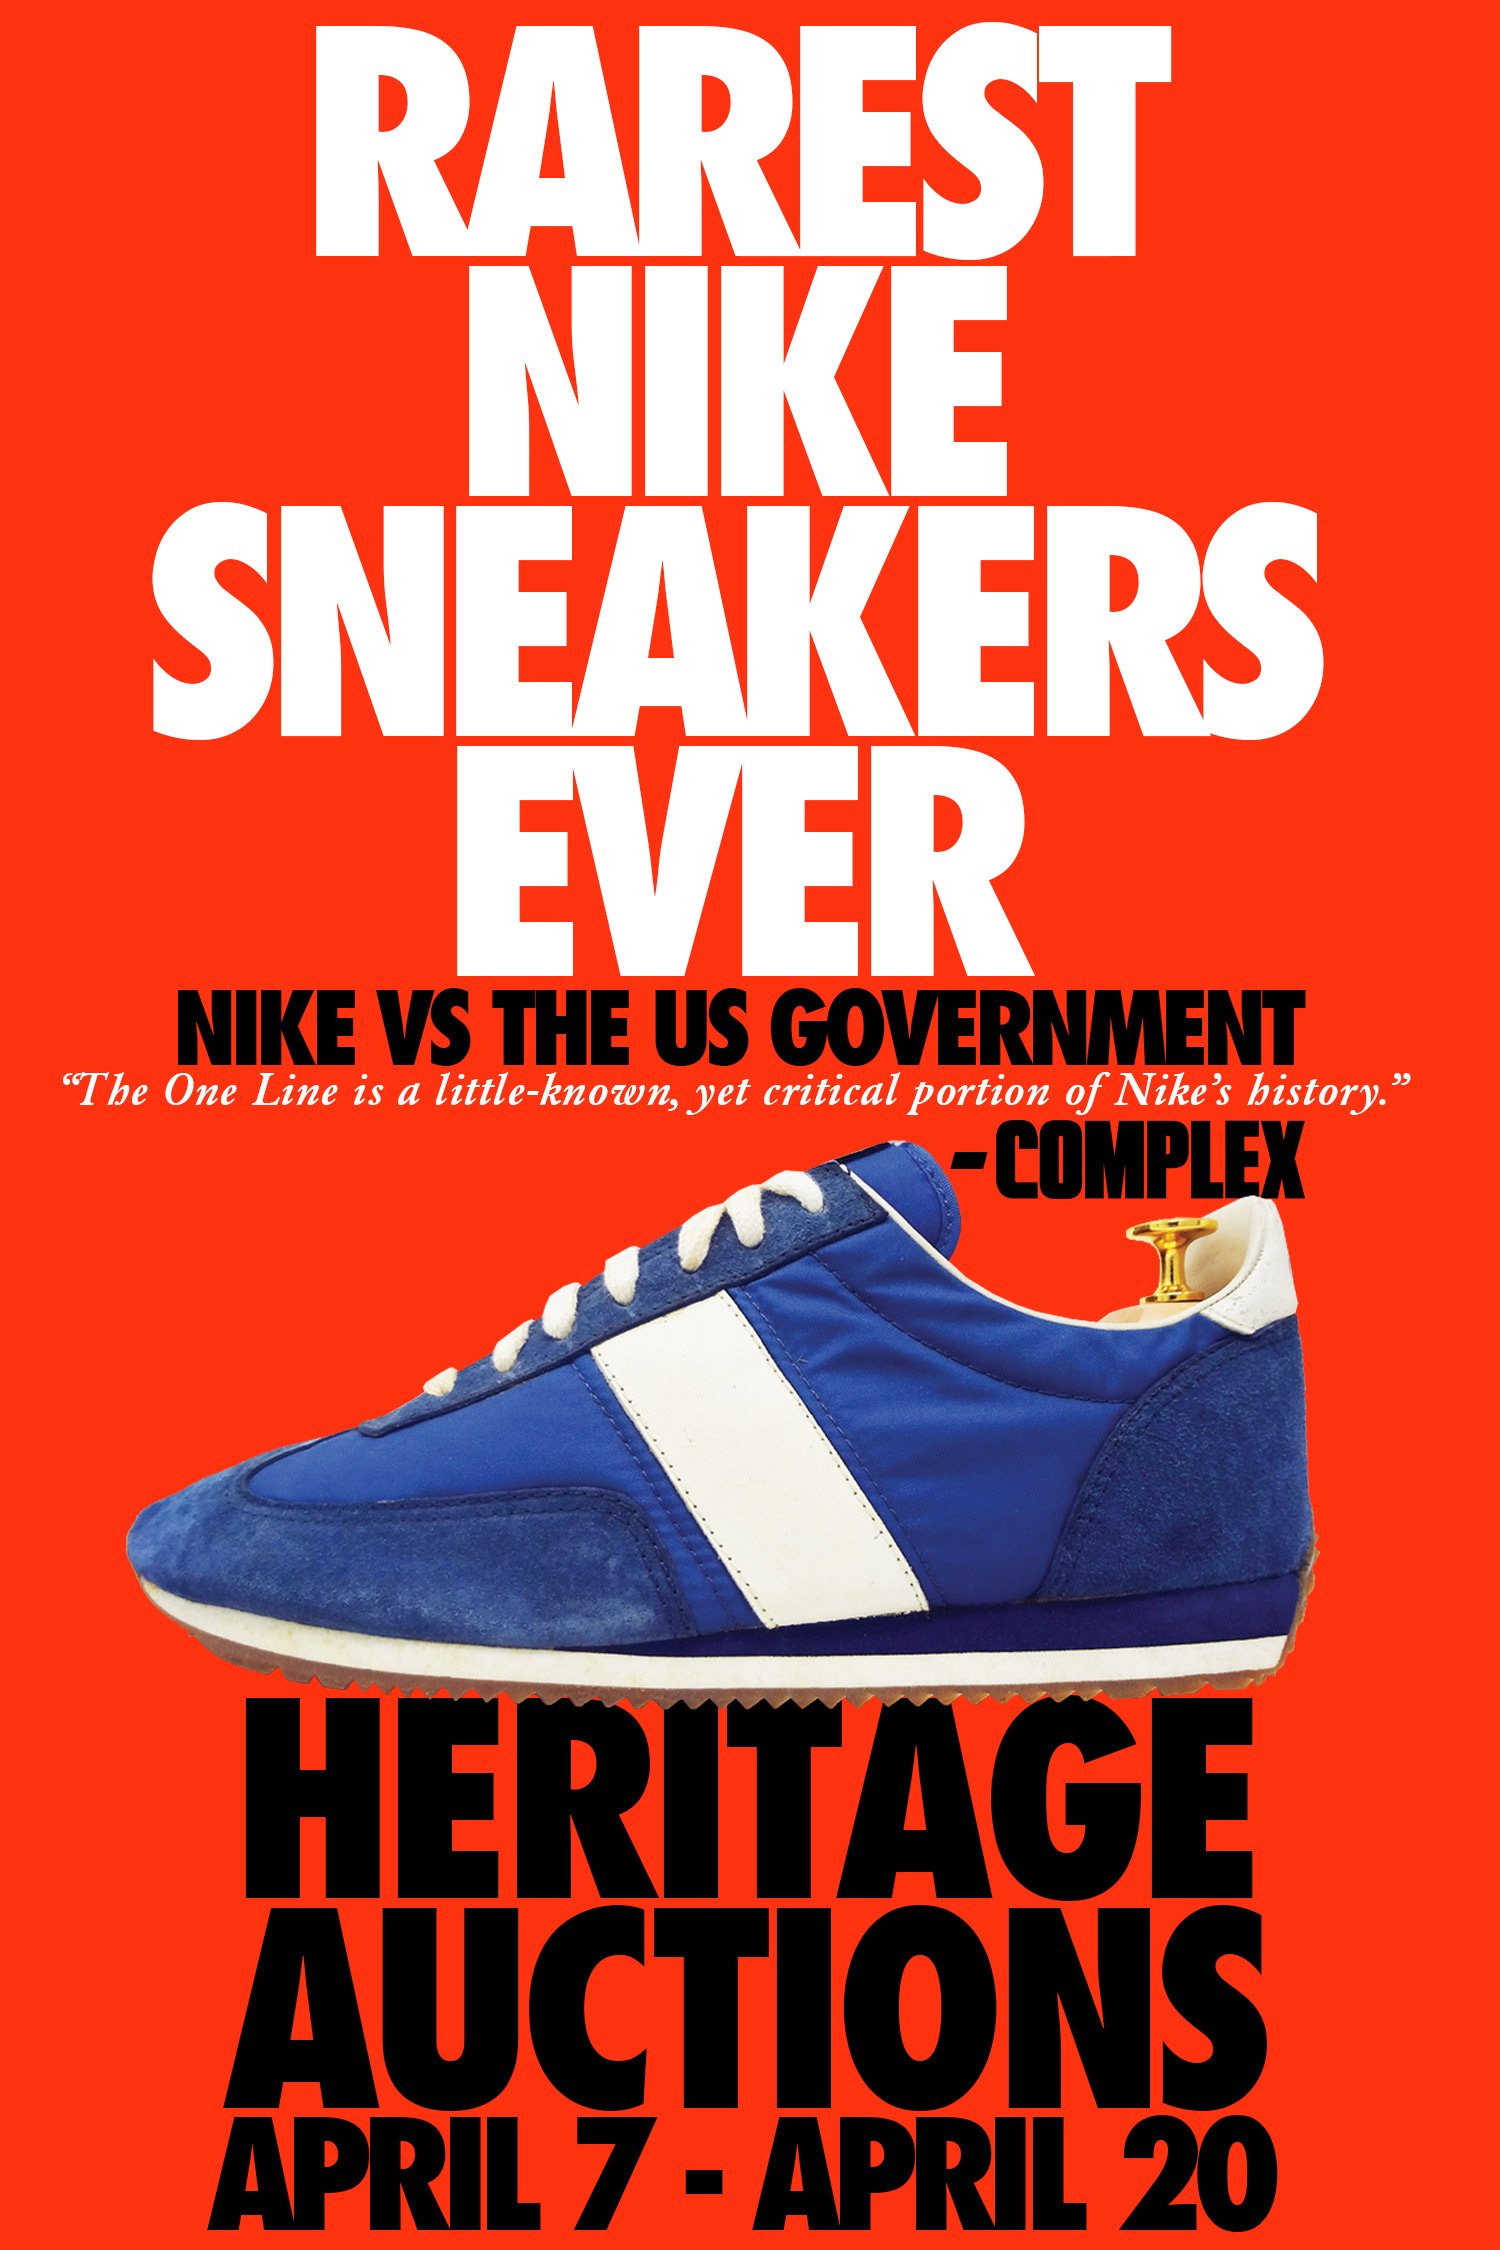 The Deffest®. A vintage and retro sneaker blog. — The Rarest Nike Sneakers Ever. The One Line at Heritage Auctions 7 - April 20, 2022